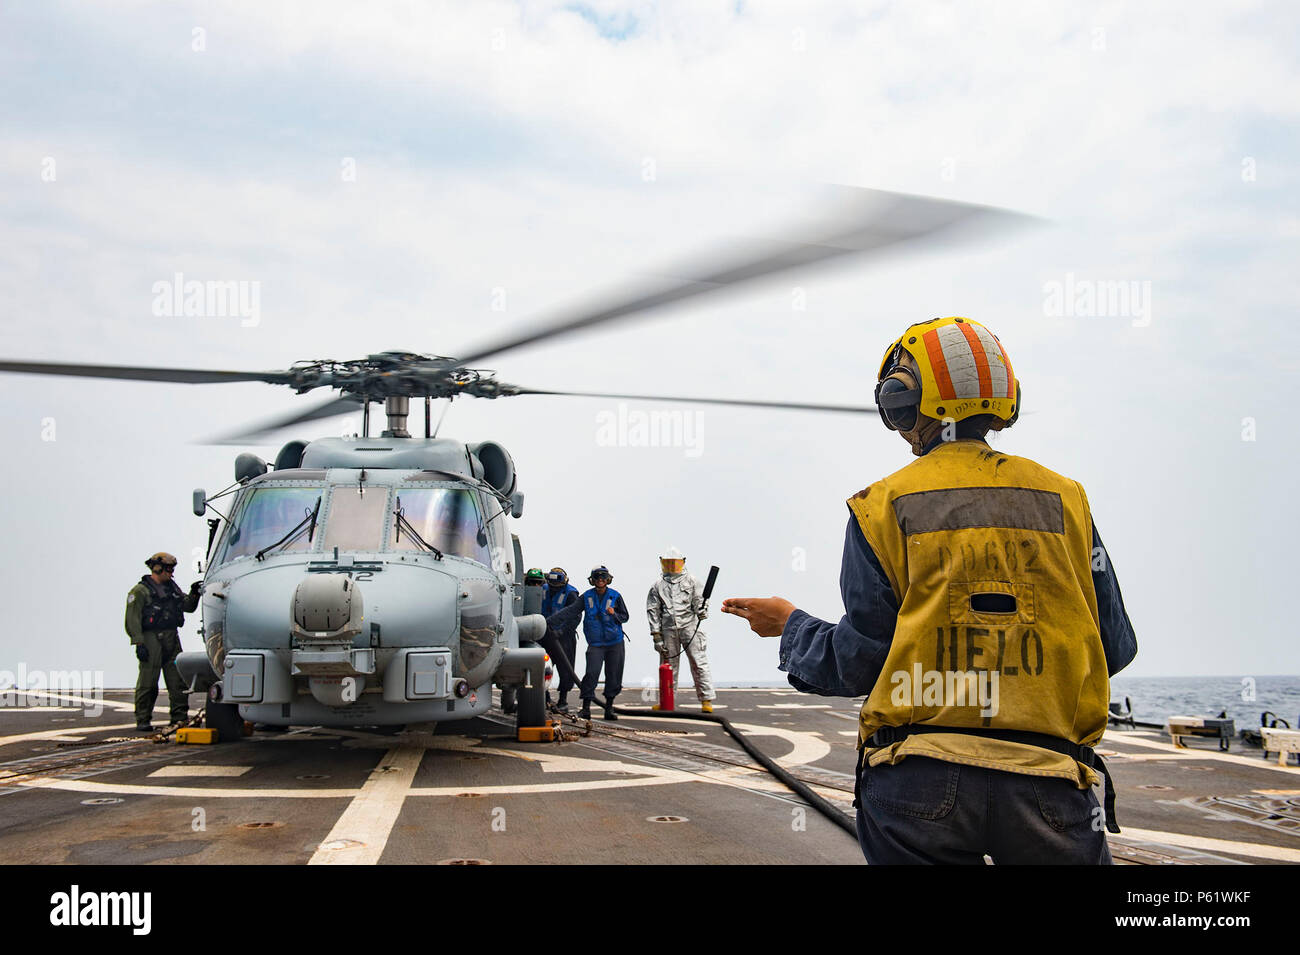 160406-N-MD297-047 PACIFIC OCEAN (April 6, 2016) - Sailors assigned to the Arleigh Burke-class guided-missile destroyer USS Lassen (DDG 82) fuel an MH-60R helicopter from the 'Jaguars' of Helicopter Maritime Strike Squadron (HSM) 60. Lassen is currently underway in support of Operation Martillo, a joint operation with the U.S. Coast Guard and partner nations within the 4th Fleet area of responsibility. Operation Martillo is being led by Joint Interagency Task Force South, in support of U.S. Southern Command. (U.S. Navy photo by Mass Communication Specialist 2nd Class Huey D. Younger Jr./Releas Stock Photo